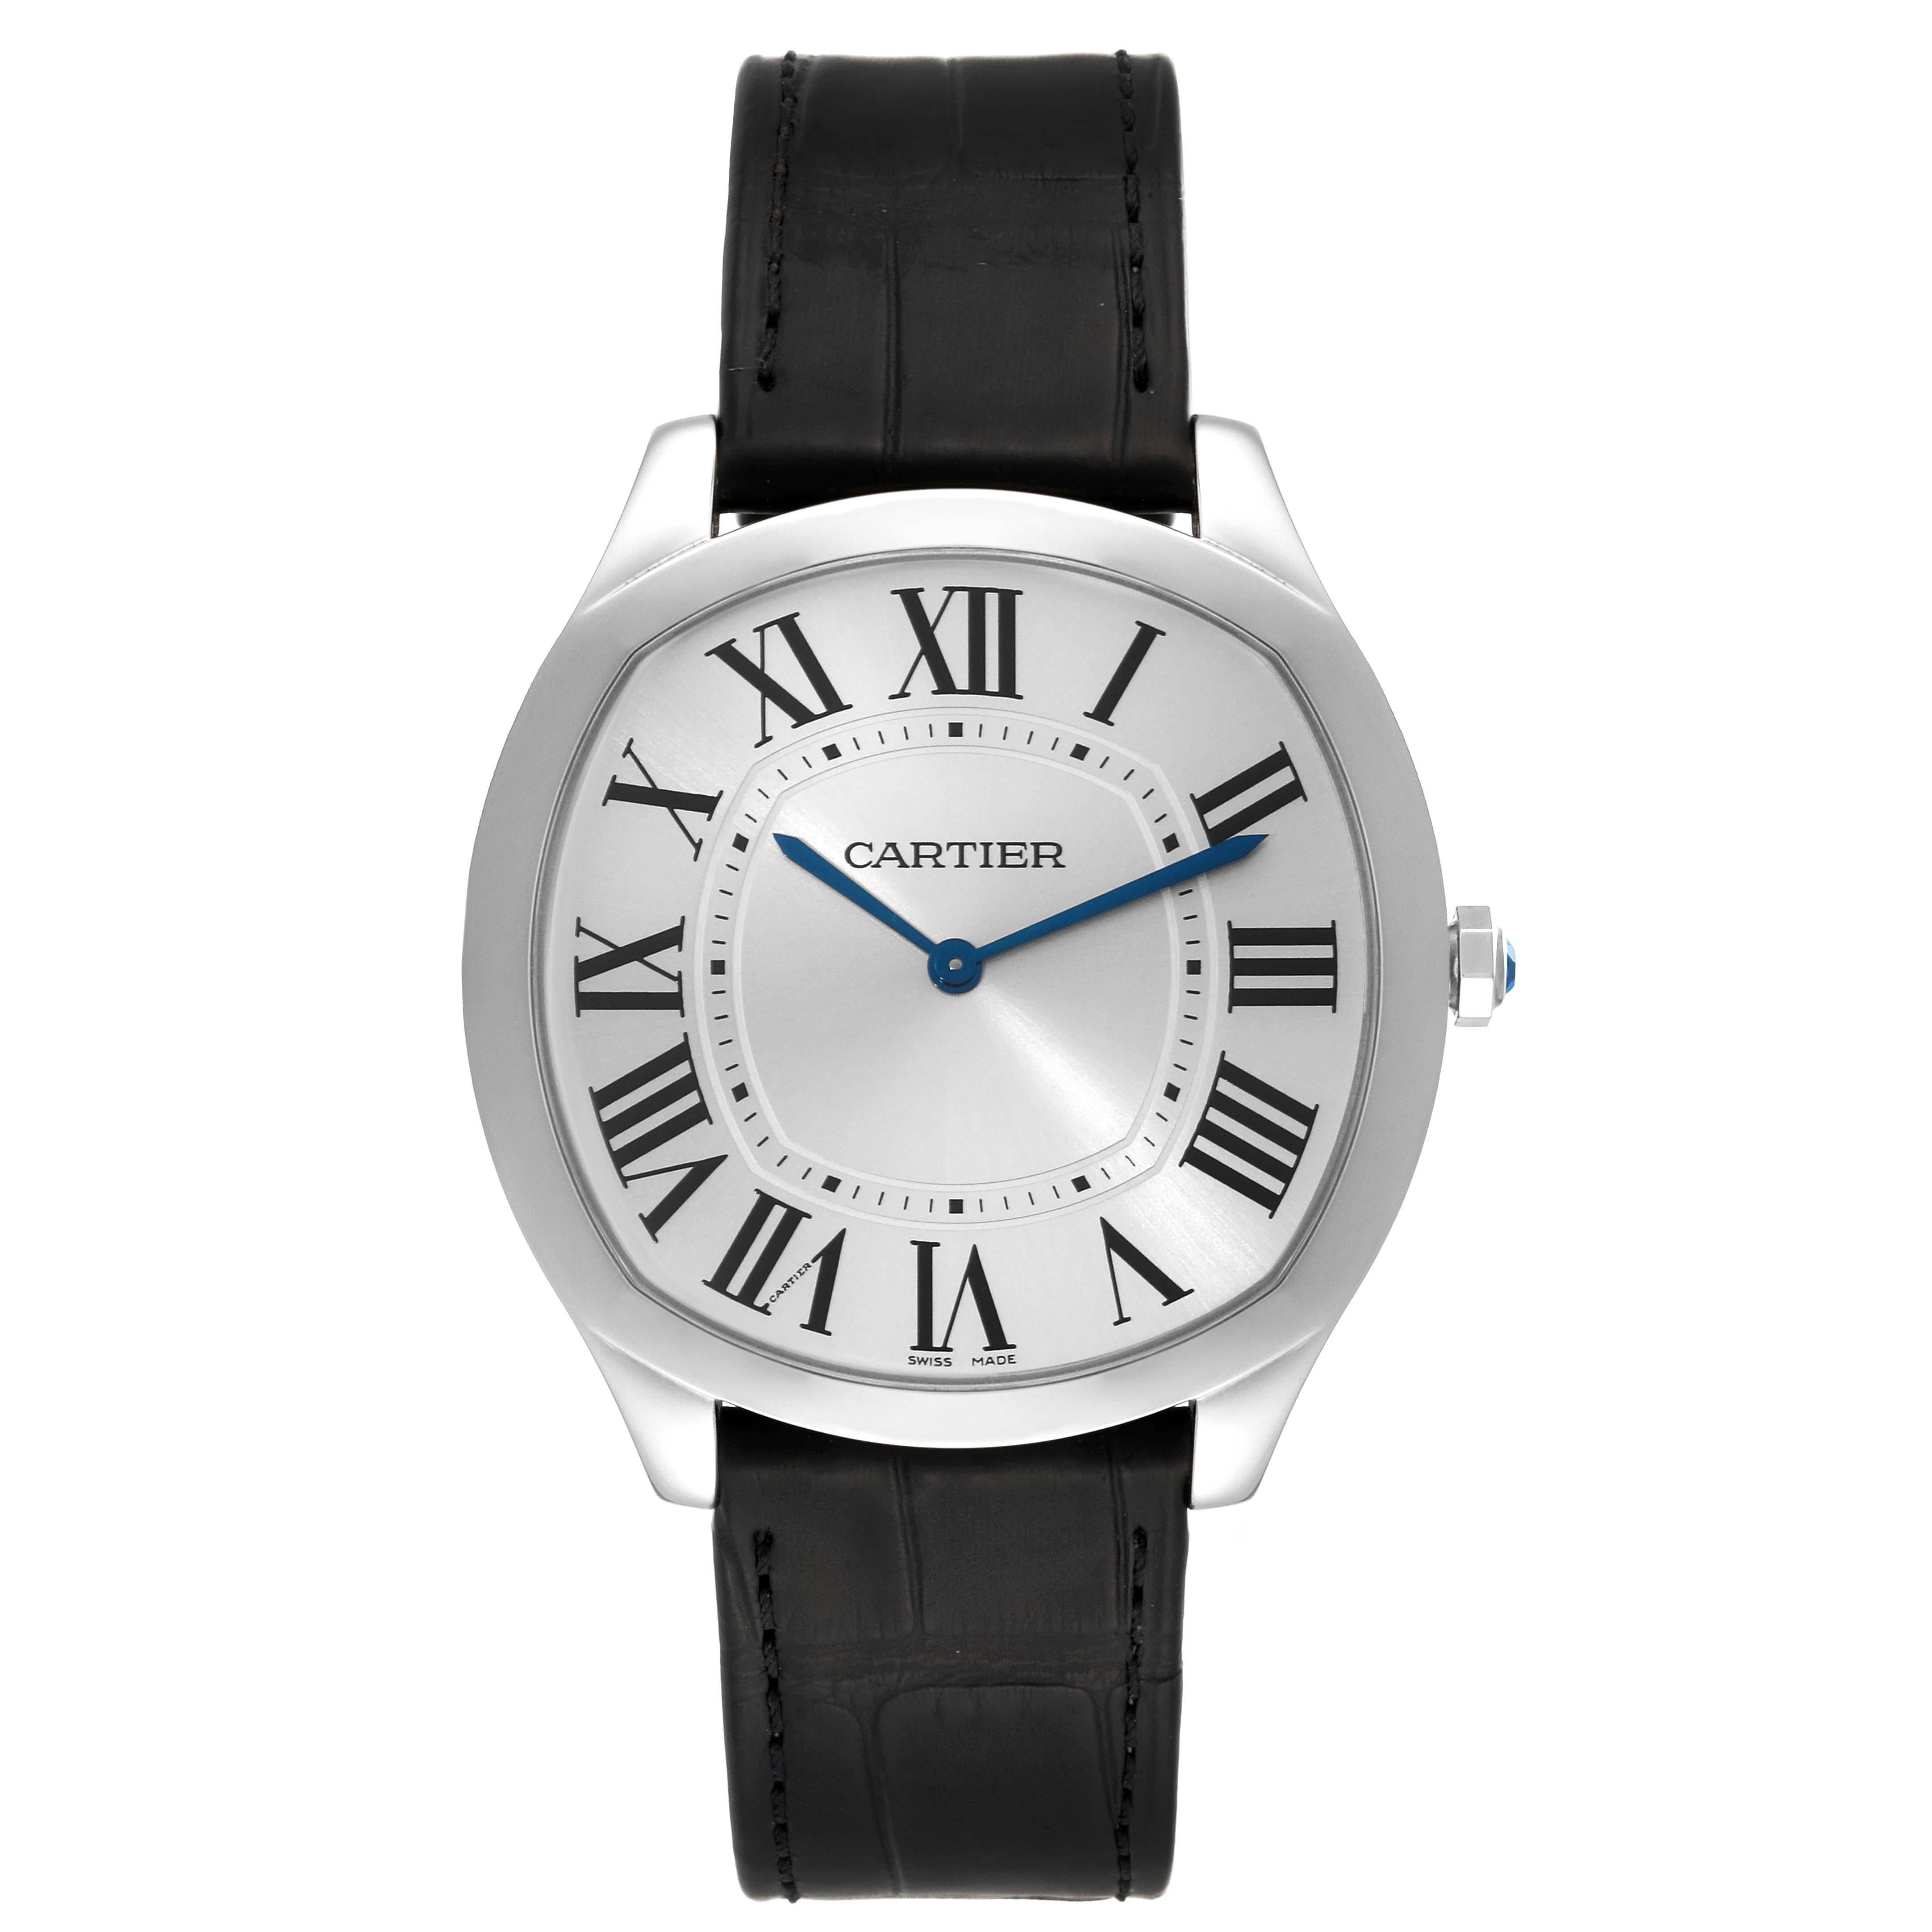 Cartier Drive Extra Flat Steel Mens Watch WSNM0011 Box Papers. Manual winding movement. Cushion-shaped stainless steel case 39mm x 45mm. Octagonal crown with faceted blue spinel. Stainless steel smooth bezel. Scratch resistant sapphire crystal.